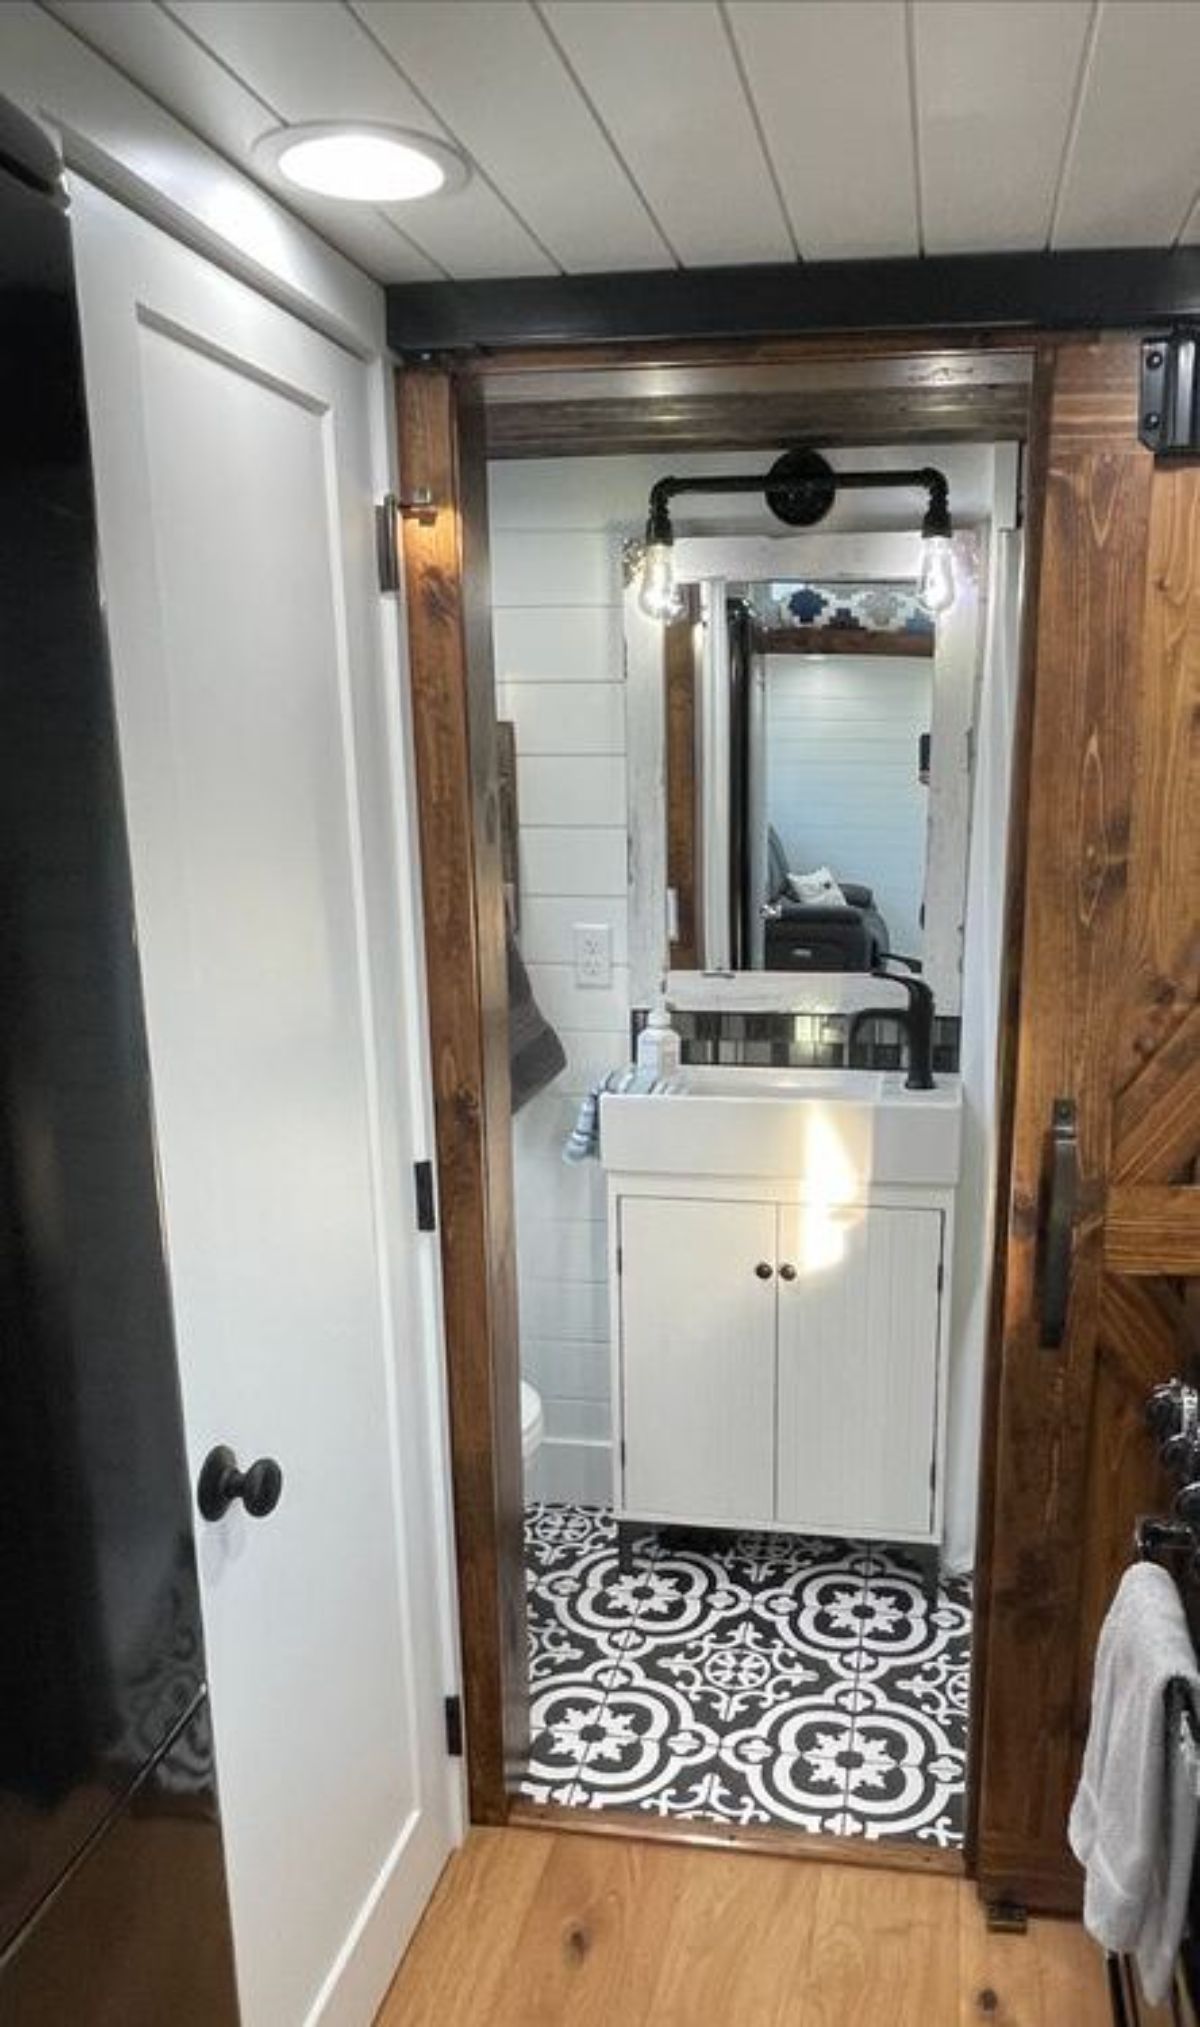 Door and sink of Modern Tiny Home